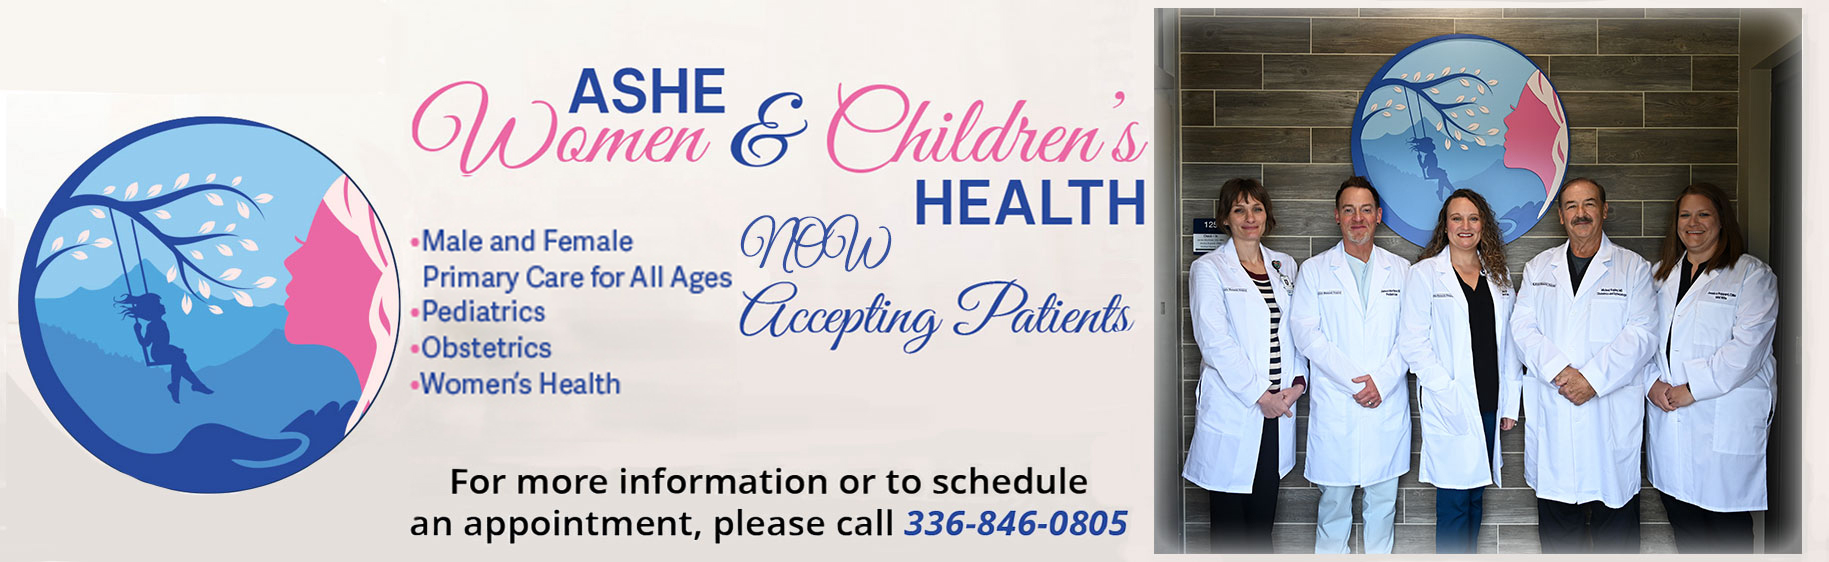 ASHE
Women & Children's HEALTH

Now Open & Accepting Patients

For more information or to schedule an appointment, please call 336-846-0805